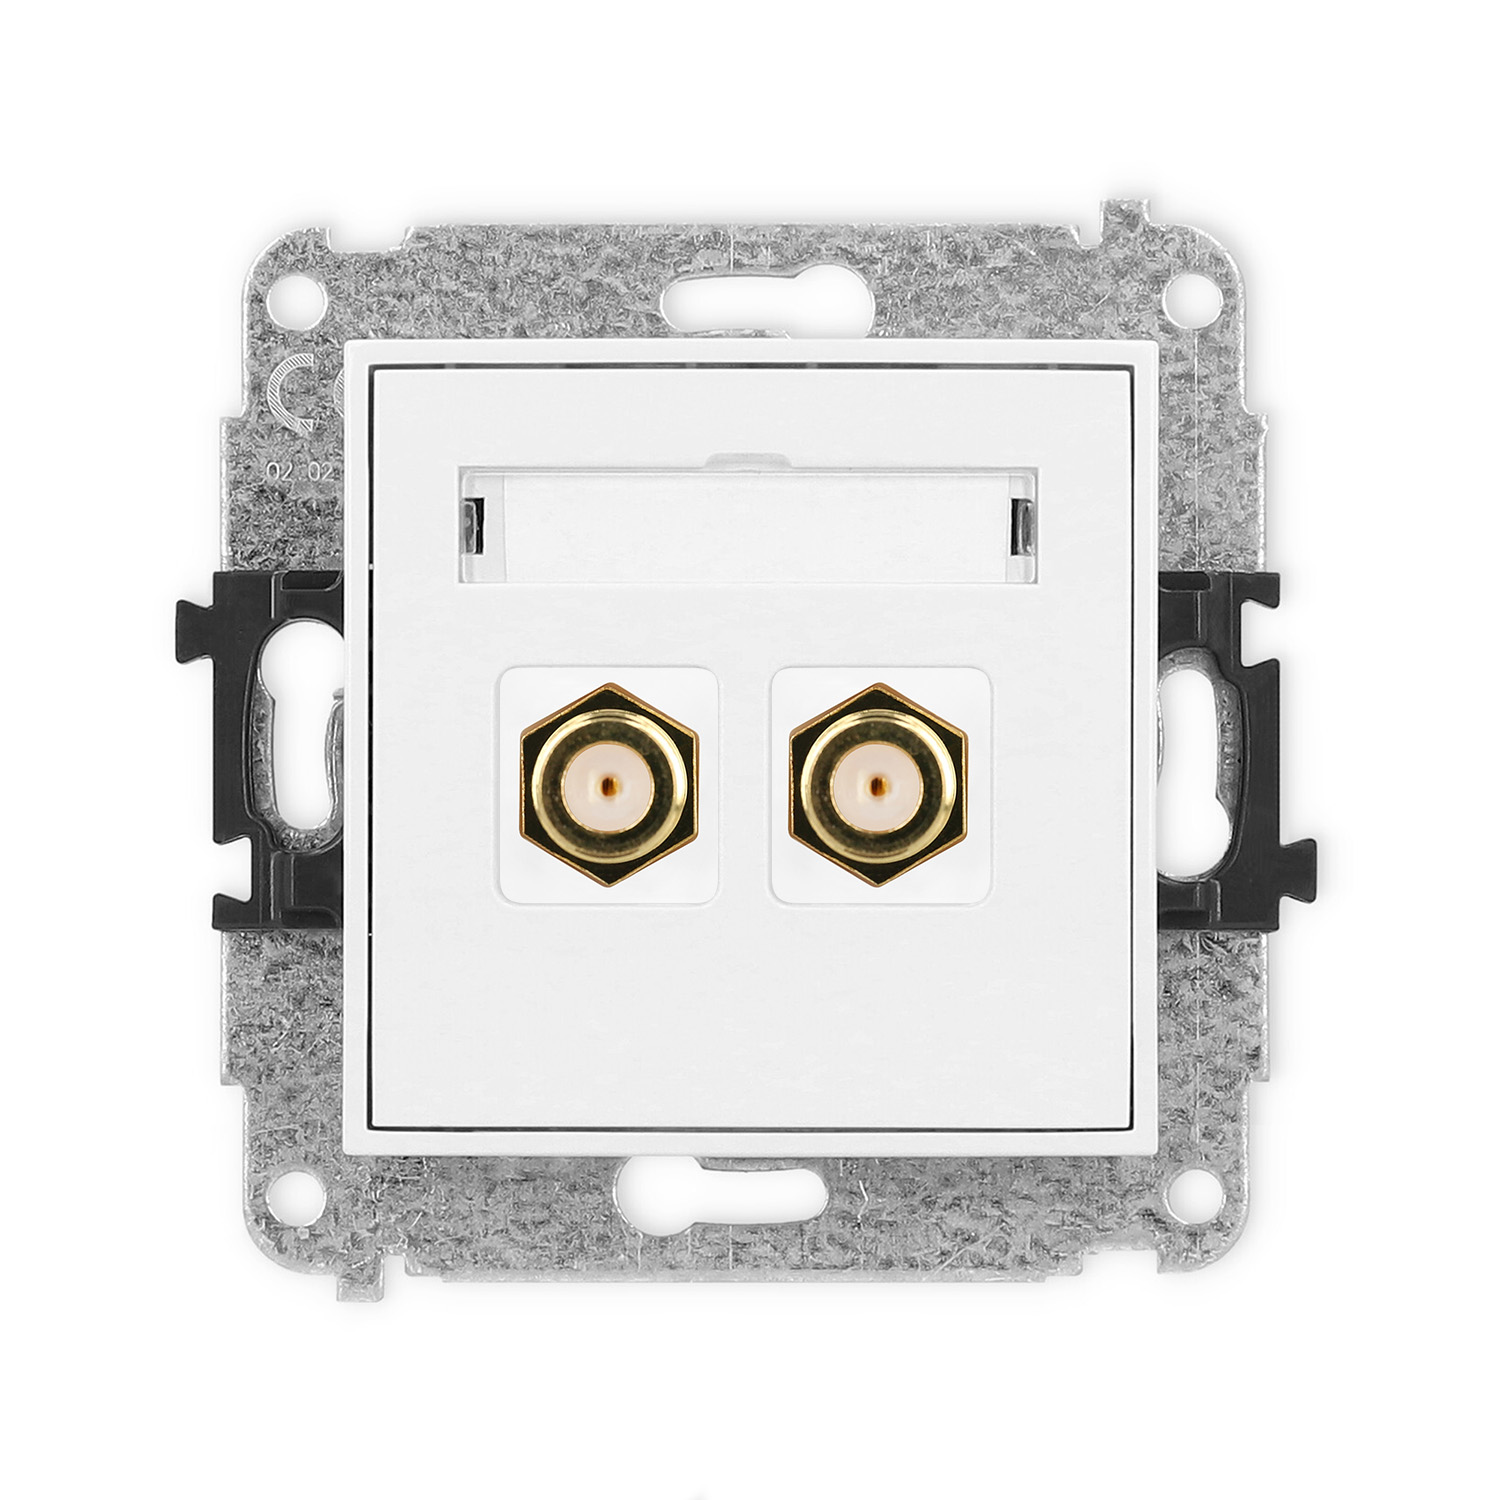 Double antenna F type socket (SAT) mechanism - gold-plated